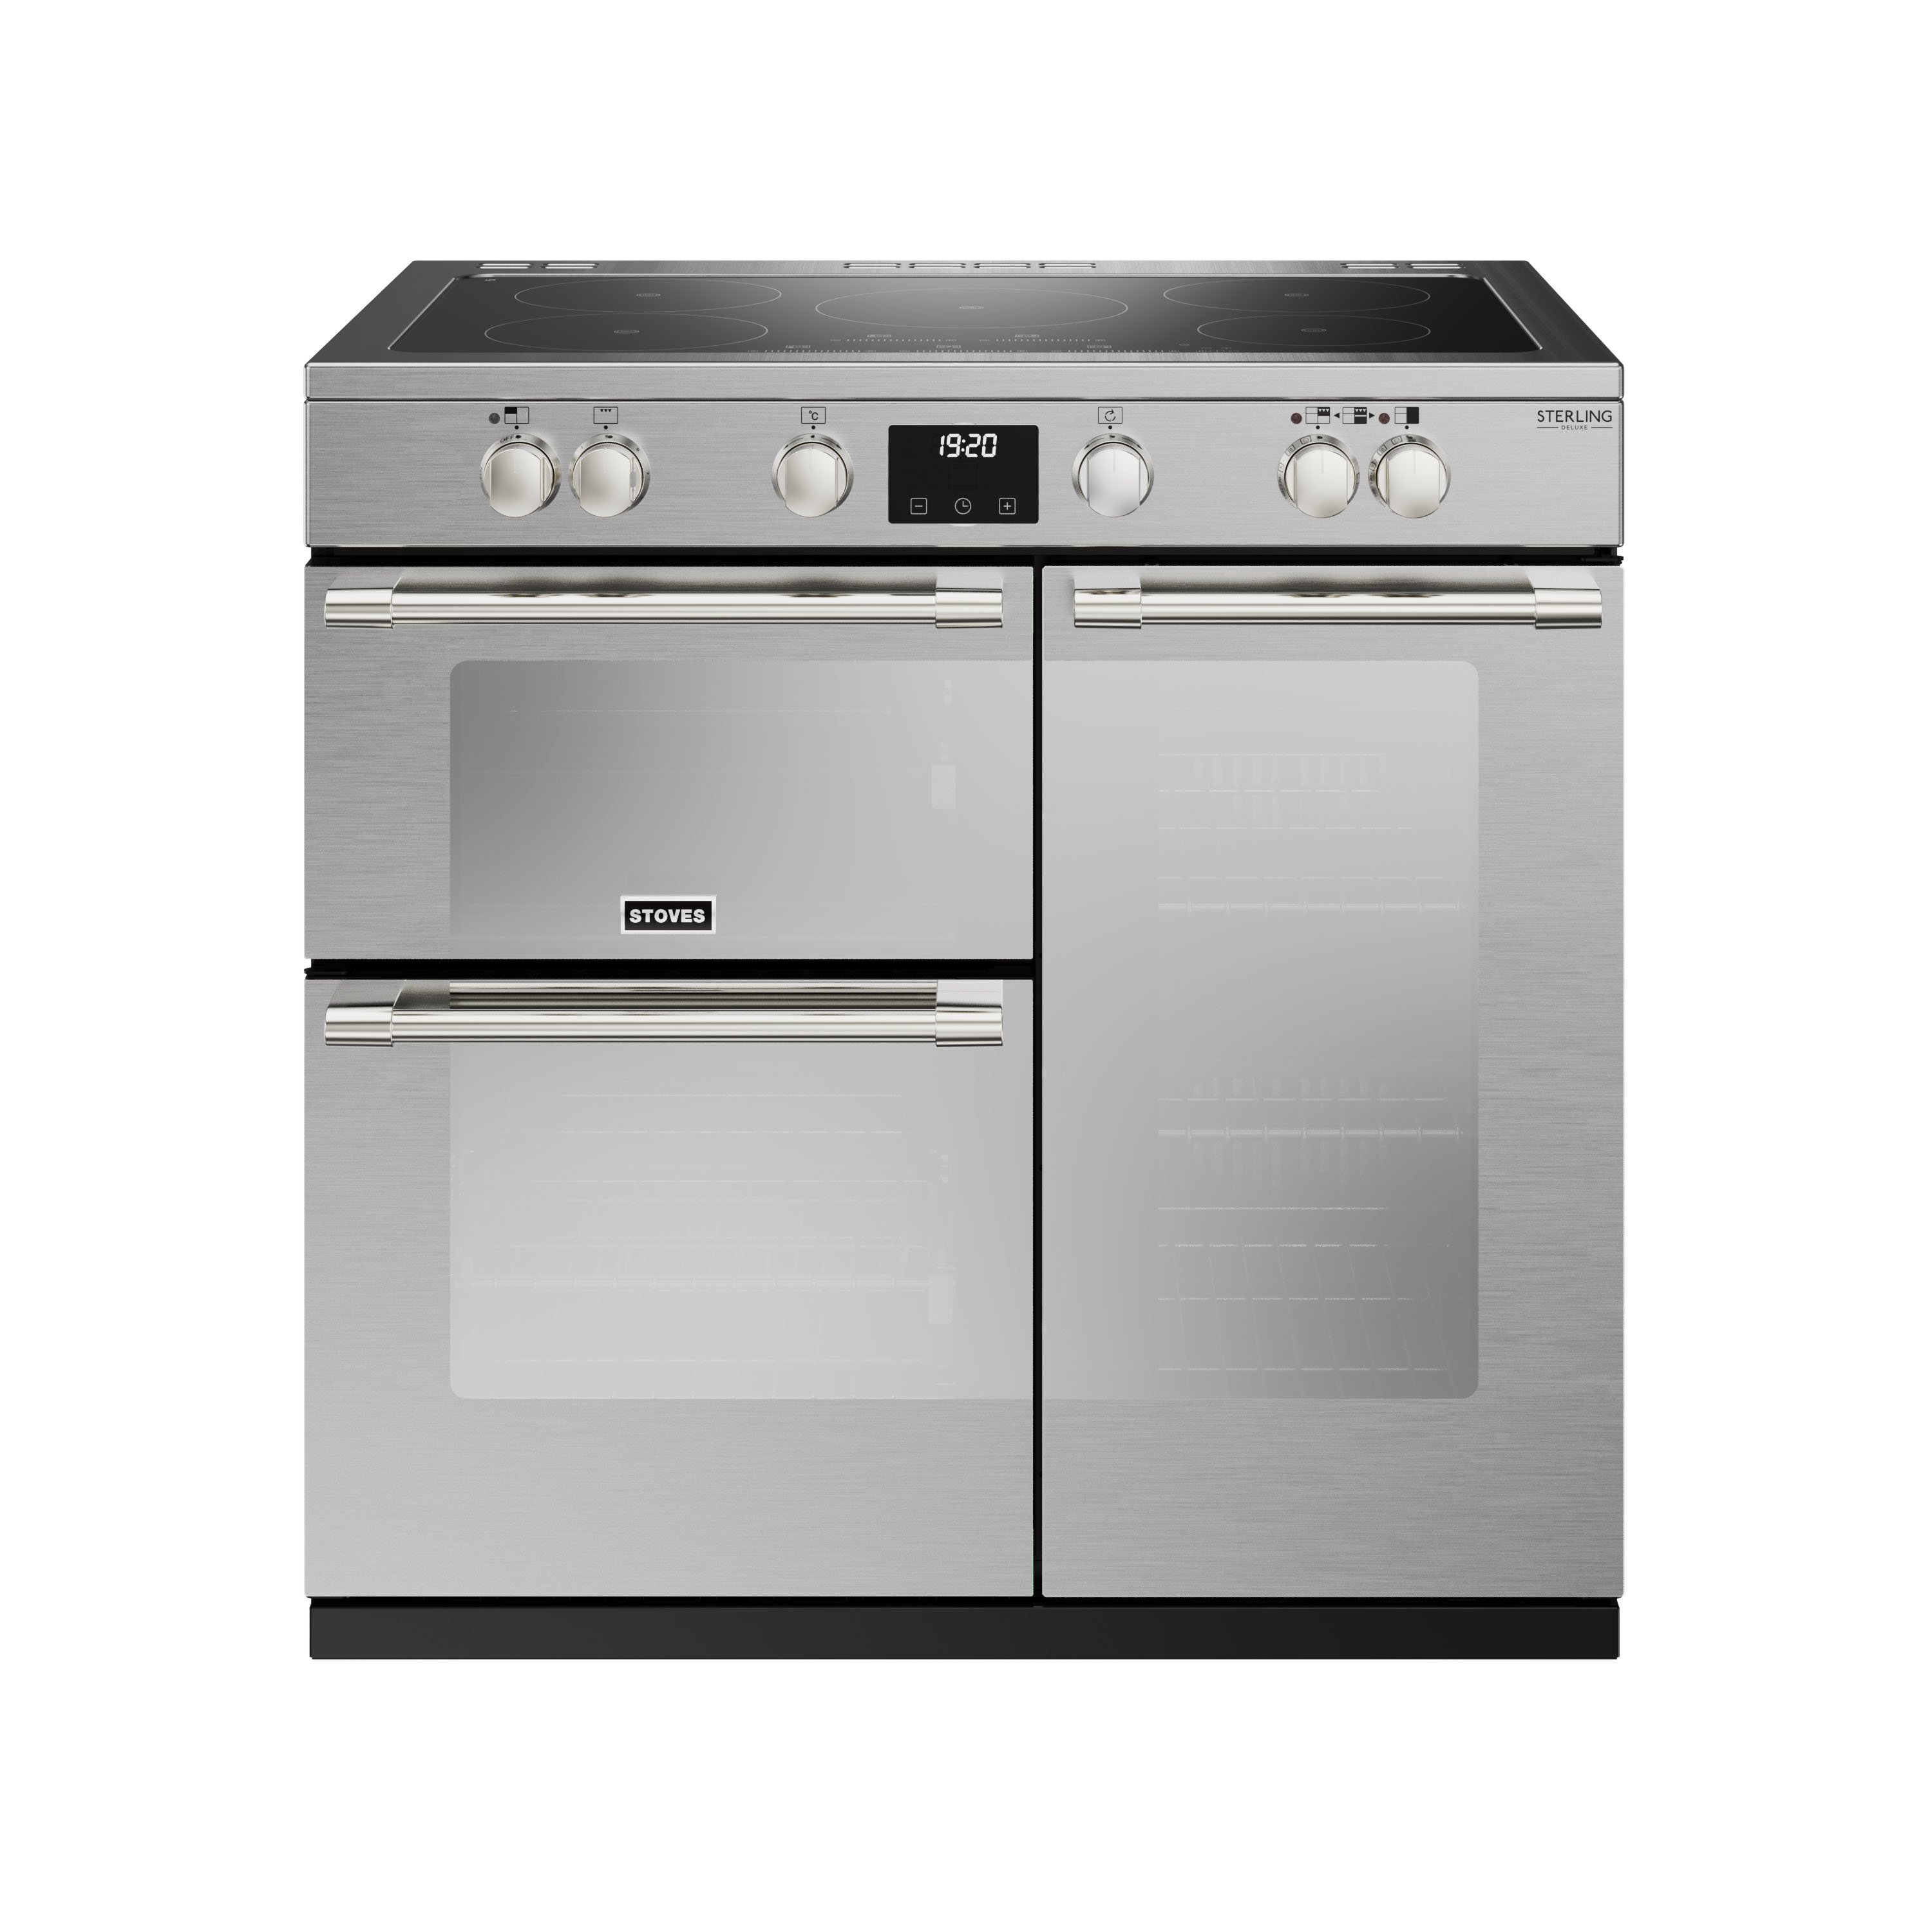 90cm electric induction range cooker with a 5 zone touch control hob, conventional oven & grill, multifunction main oven with TrueTemp digital thermostat, and tall fanned oven with PROFLEX™